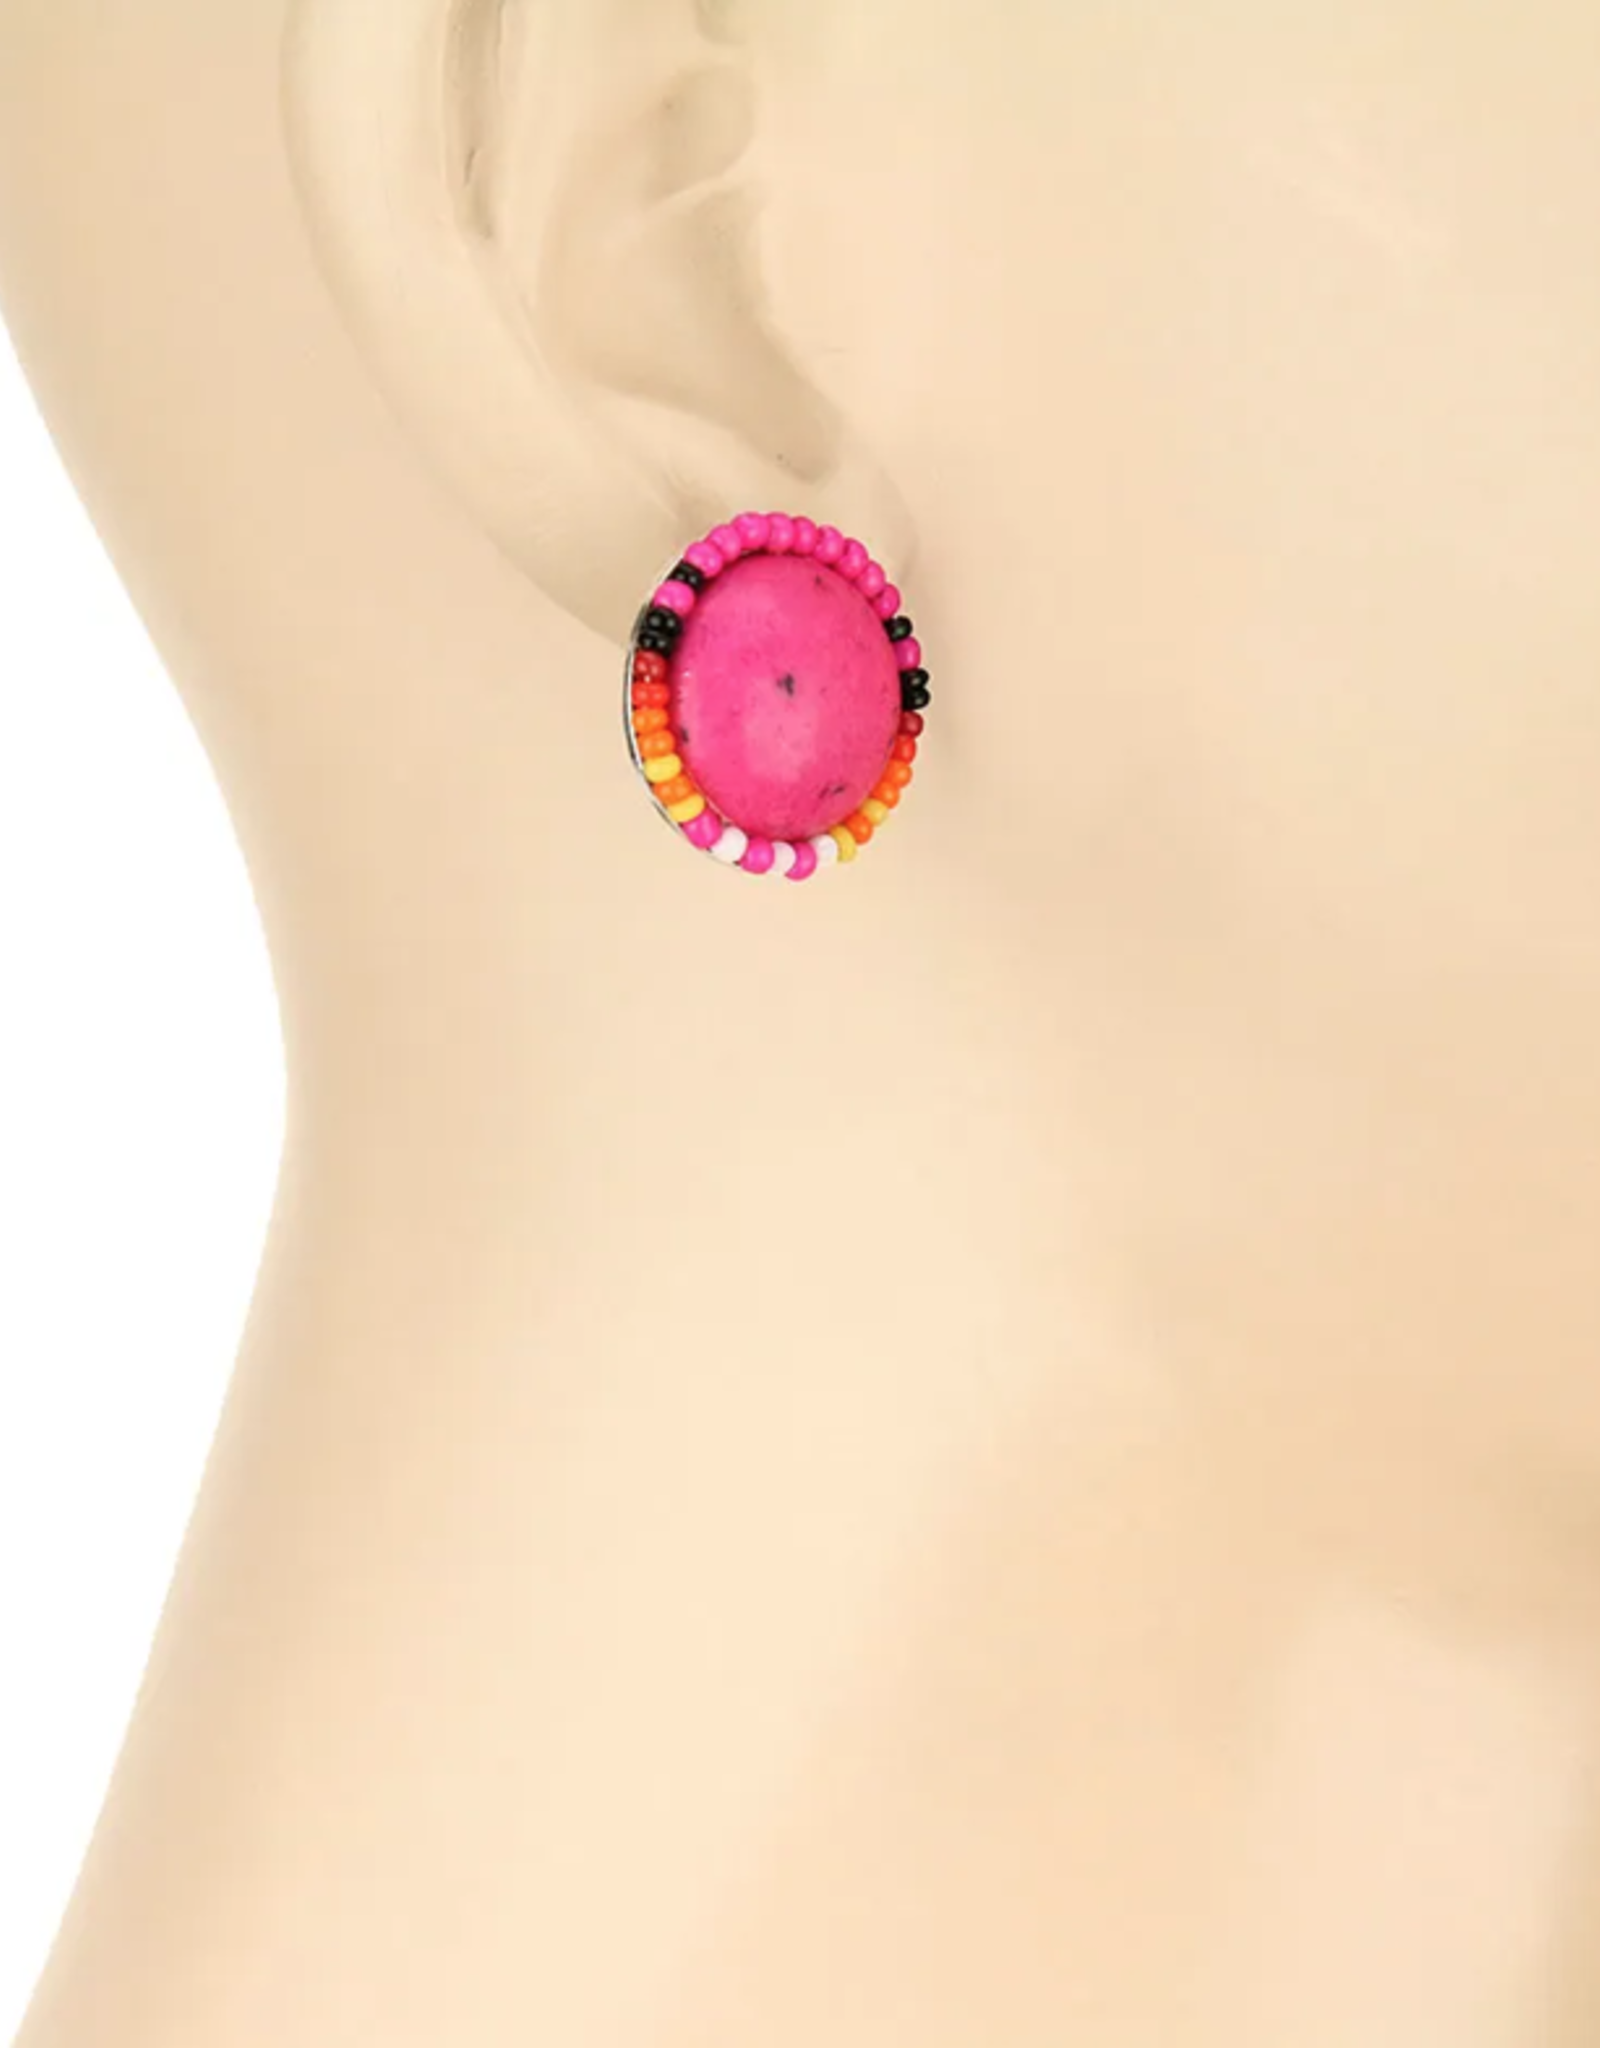 EARRING PINK ROUND STONE W/SEED BEADS STUD